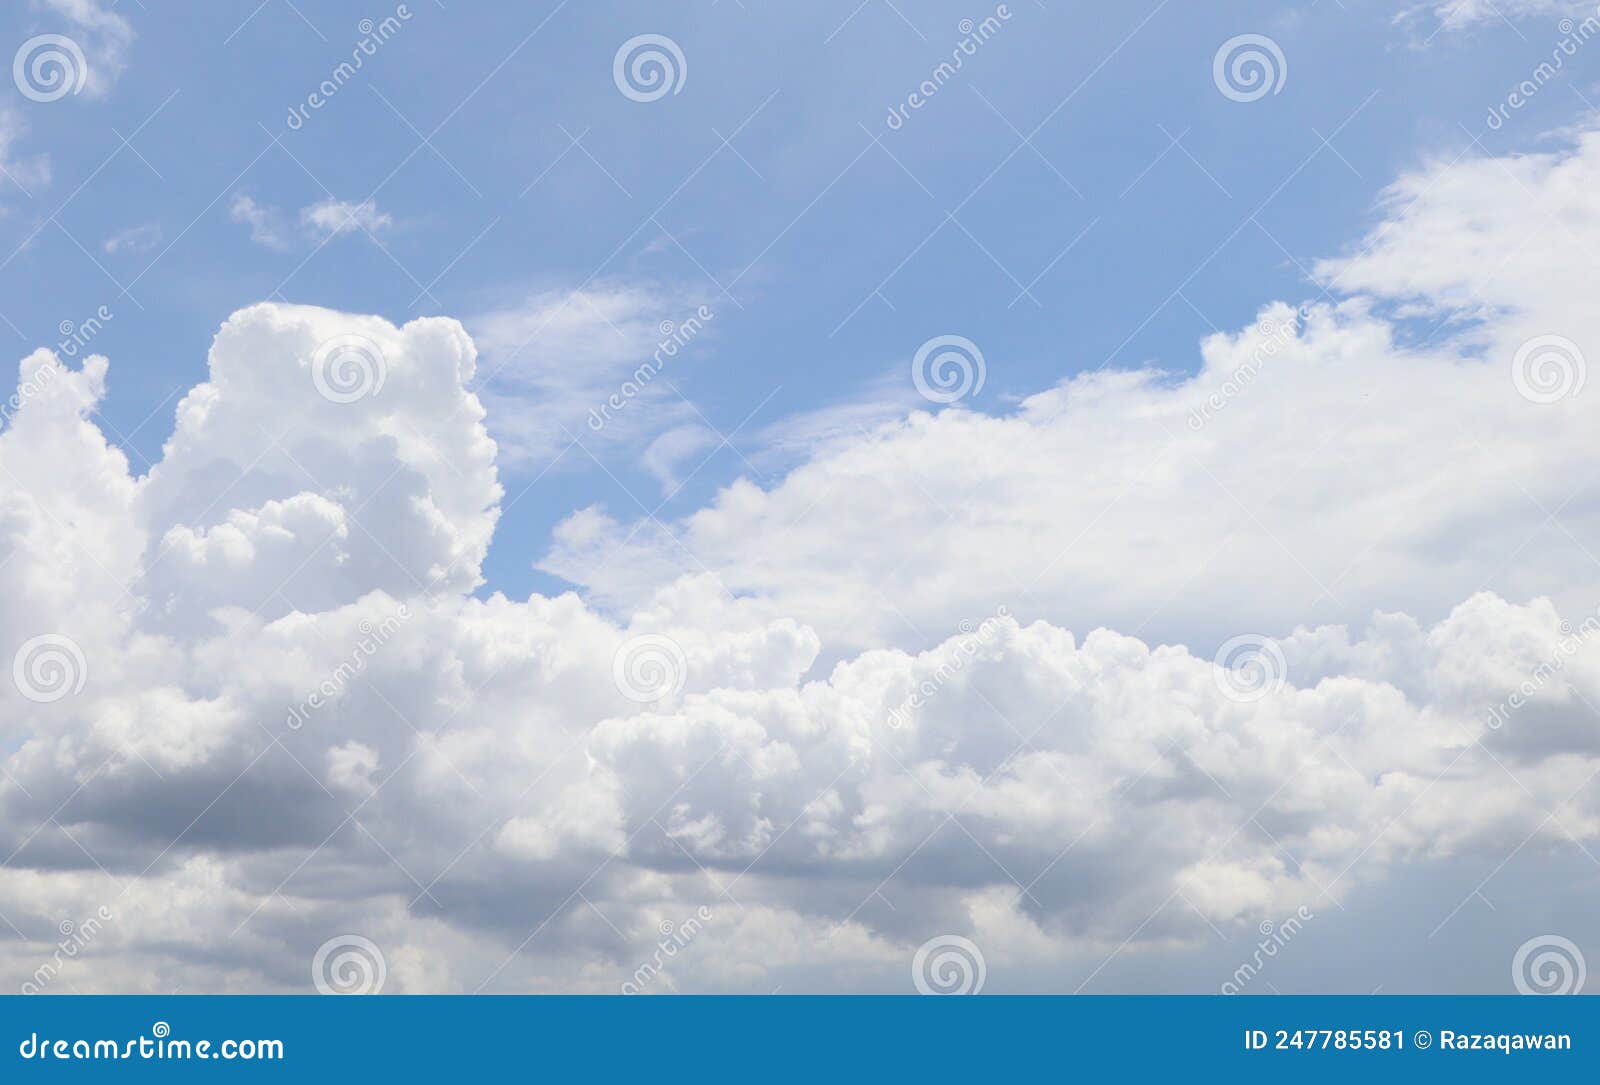 Vast, Bright, Clear and Cloudy Blue Sky Stock Image - Image of ...